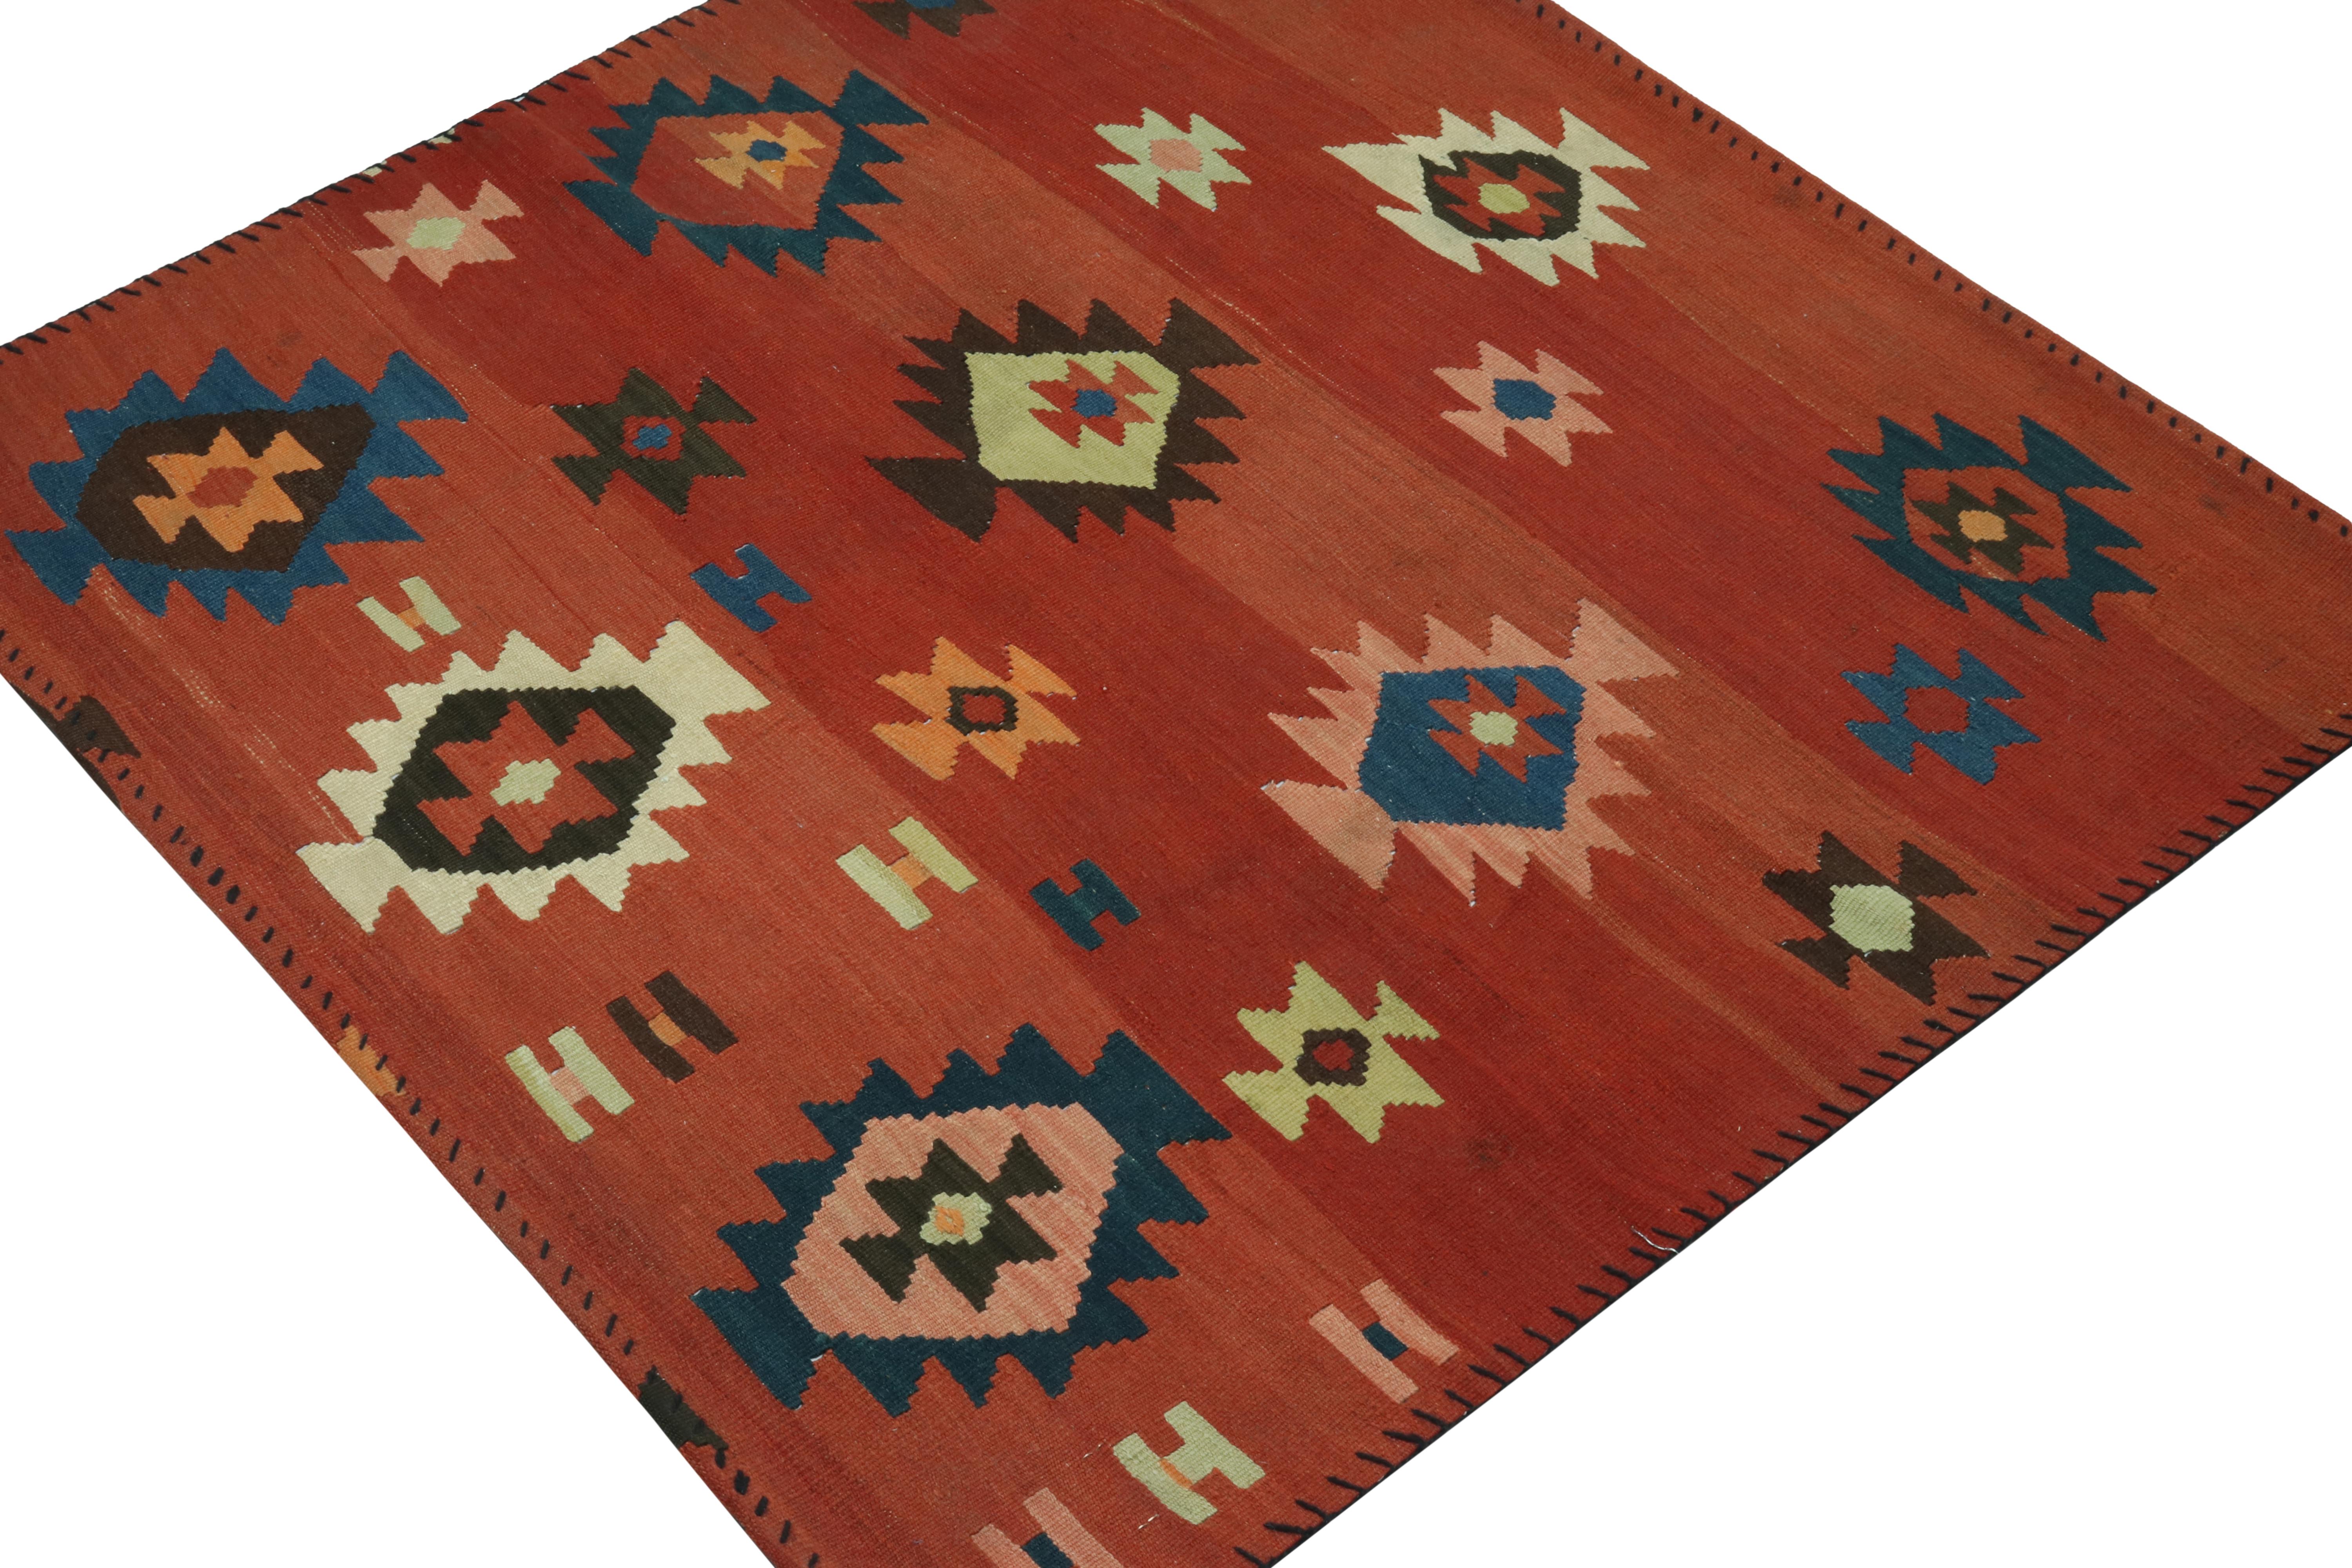 This vintage 3x3 Persian kilim is an Afghan tribal rug—handwoven in wool circa 1950-1960.

Further on the Design:

The design prefers warm colors in reds, oranges, and pinks like salmon and brick hues in its background. Keen eyes will admire navy